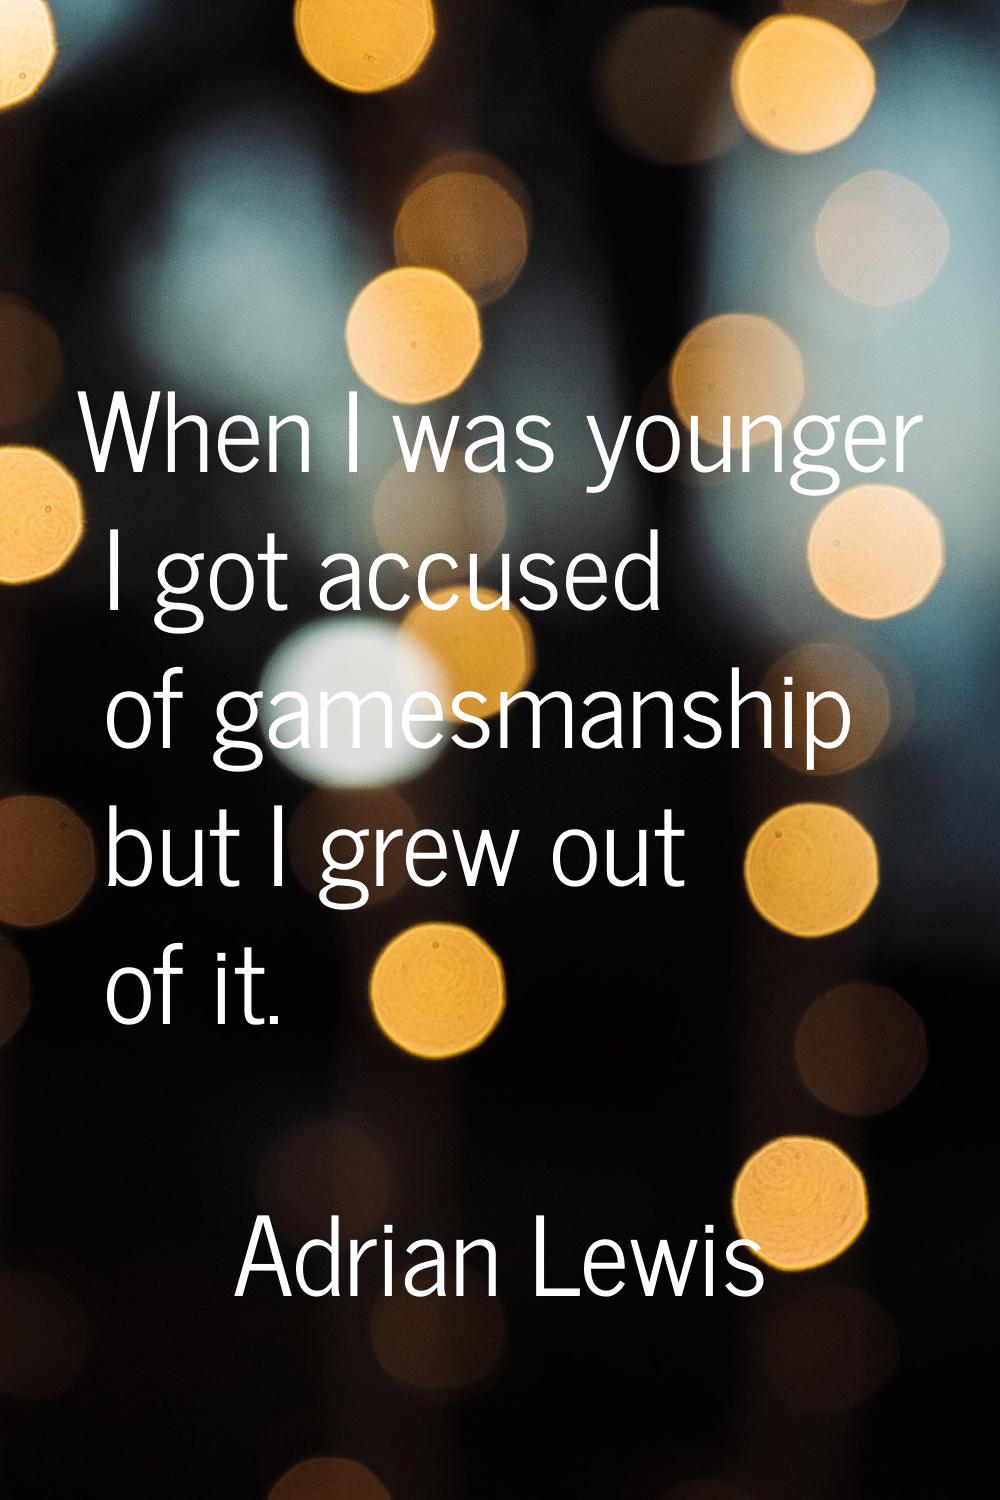 When I was younger I got accused of gamesmanship but I grew out of it.